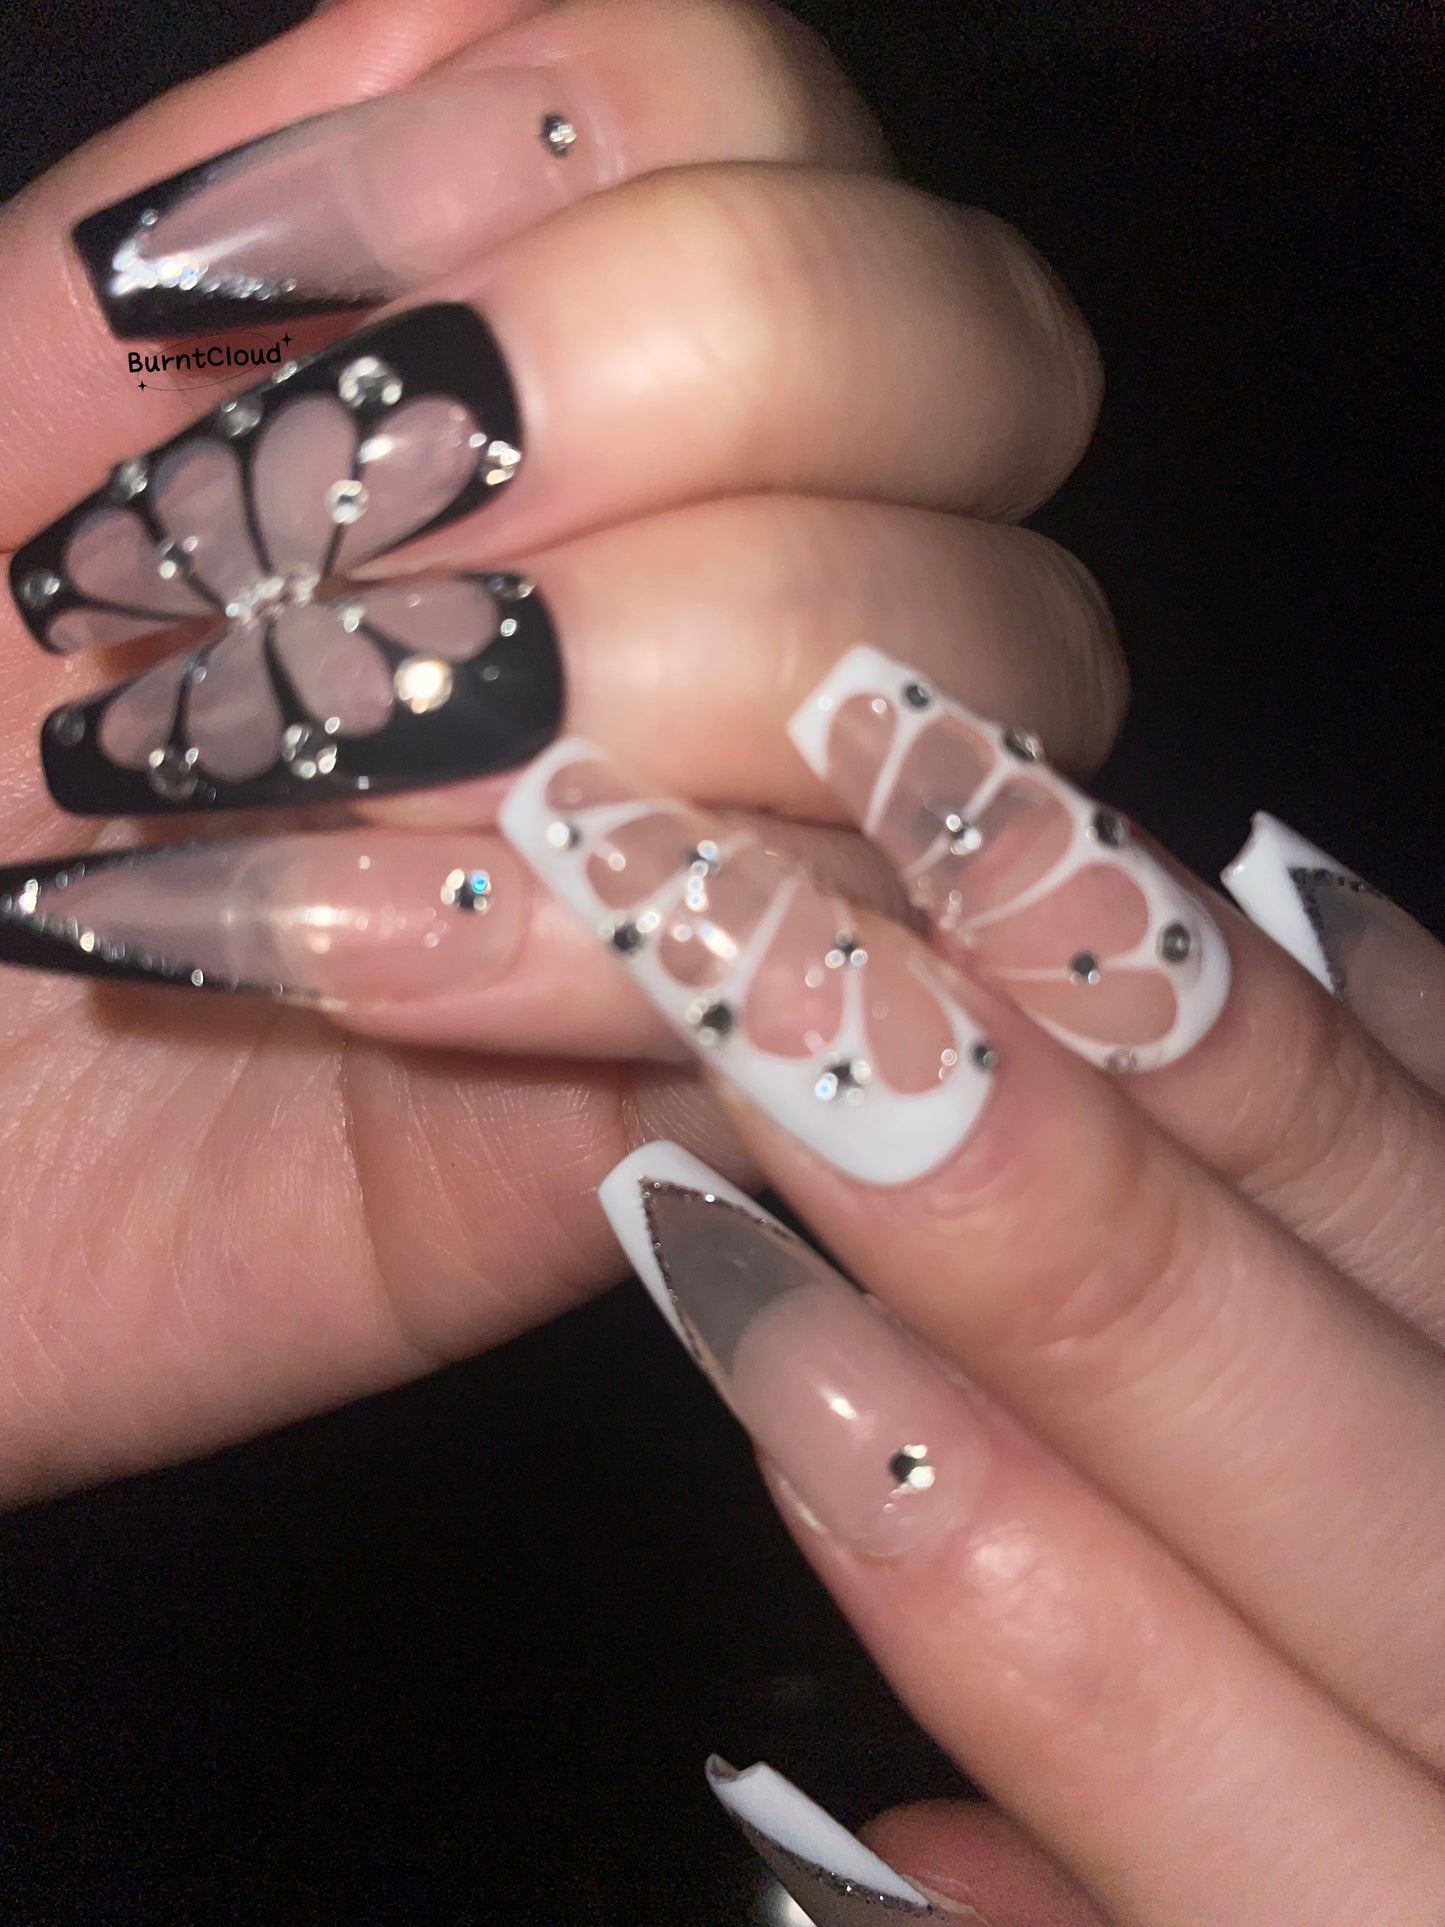 "Meant To Be" Rhinestone Glitter B&W Butterflies Frenchtip Nails | 21 Custom Handpainted Press on Nails